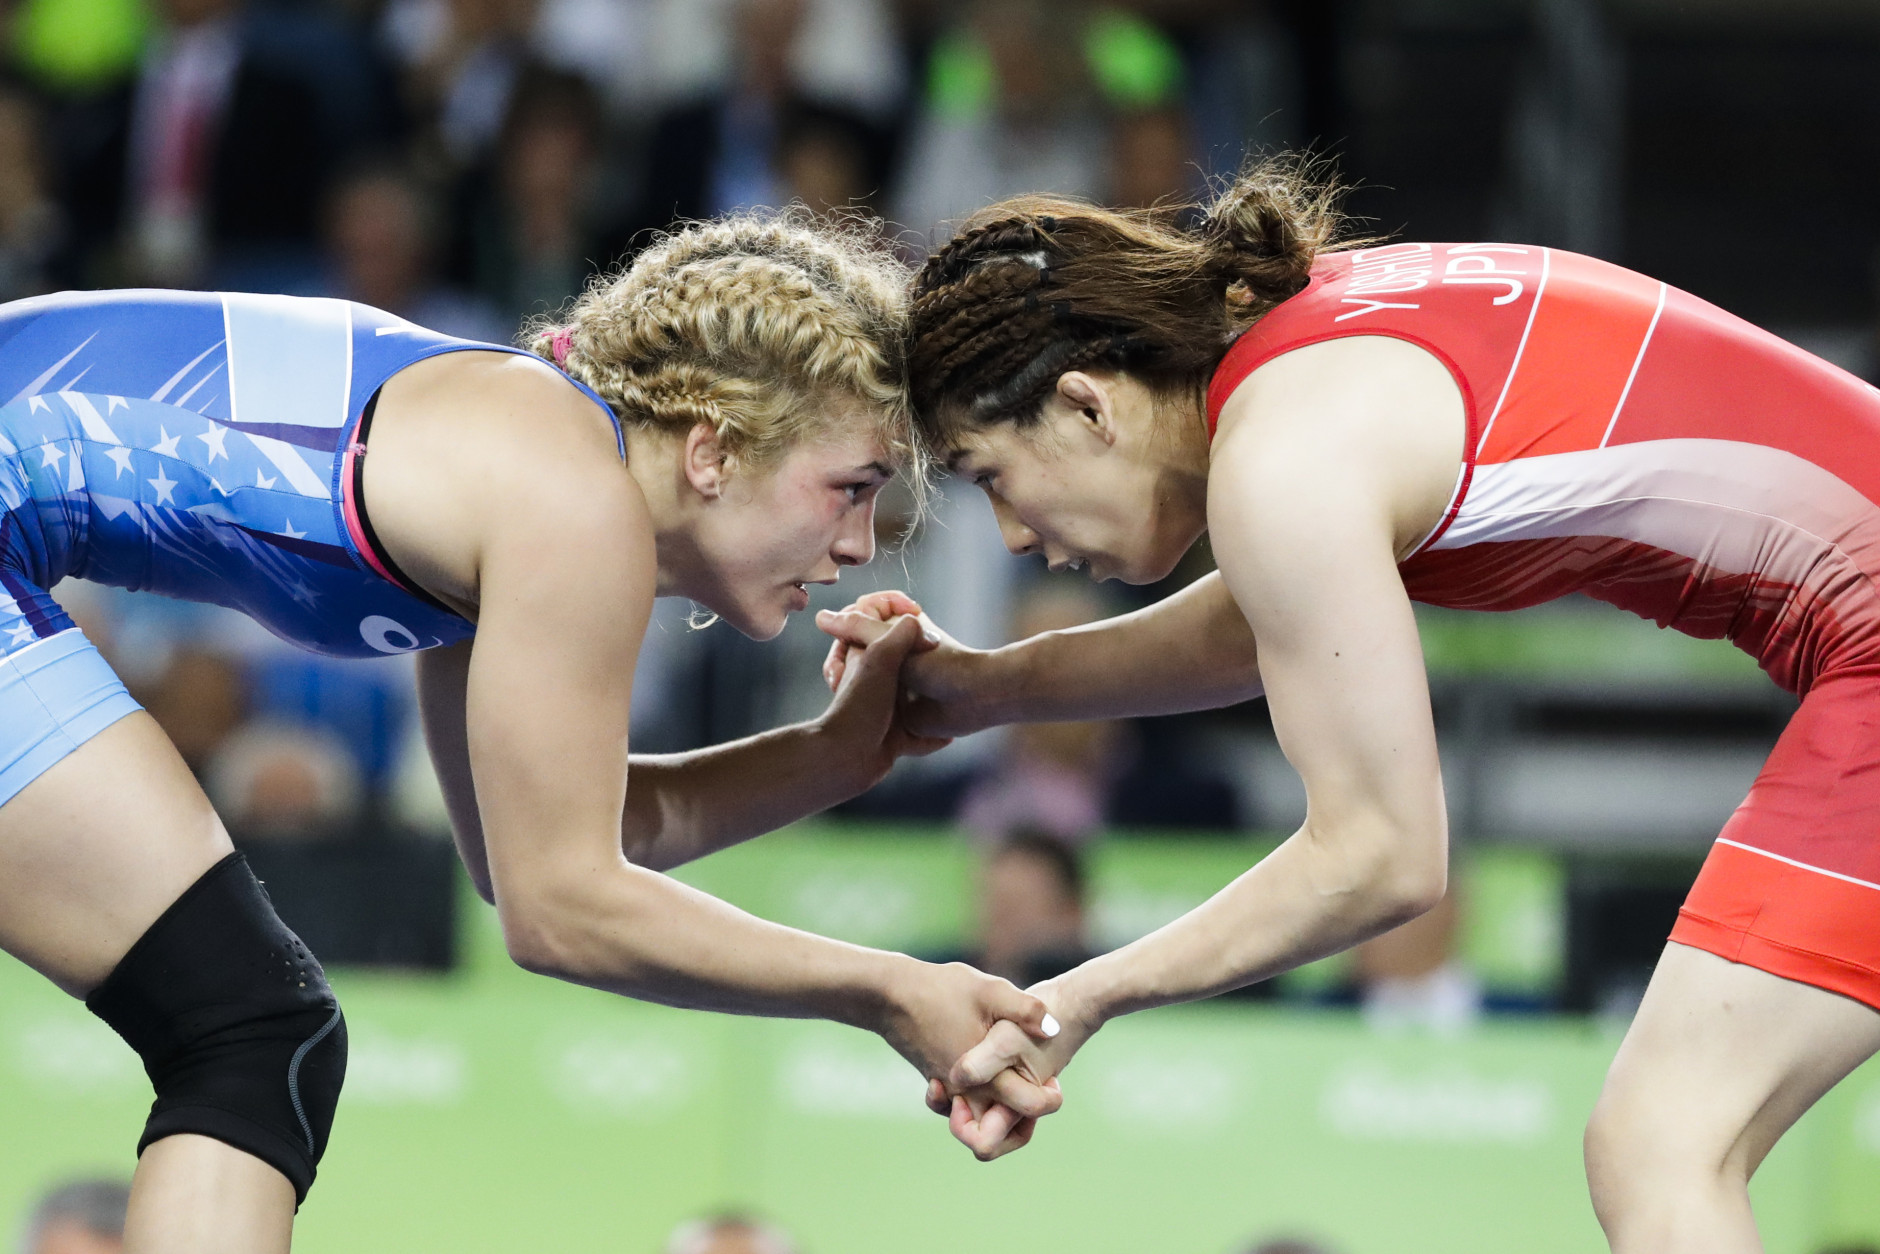 United States' Helen Louise Maroulis, blue, competes against Japan's Saori Yoshida for the gold medal of the women's 53-kg freestyle wrestling competition at the 2016 Summer Olympics in Rio de Janeiro, Brazil, Thursday, Aug. 18, 2016. (AP Photo/Markus Schreiber)